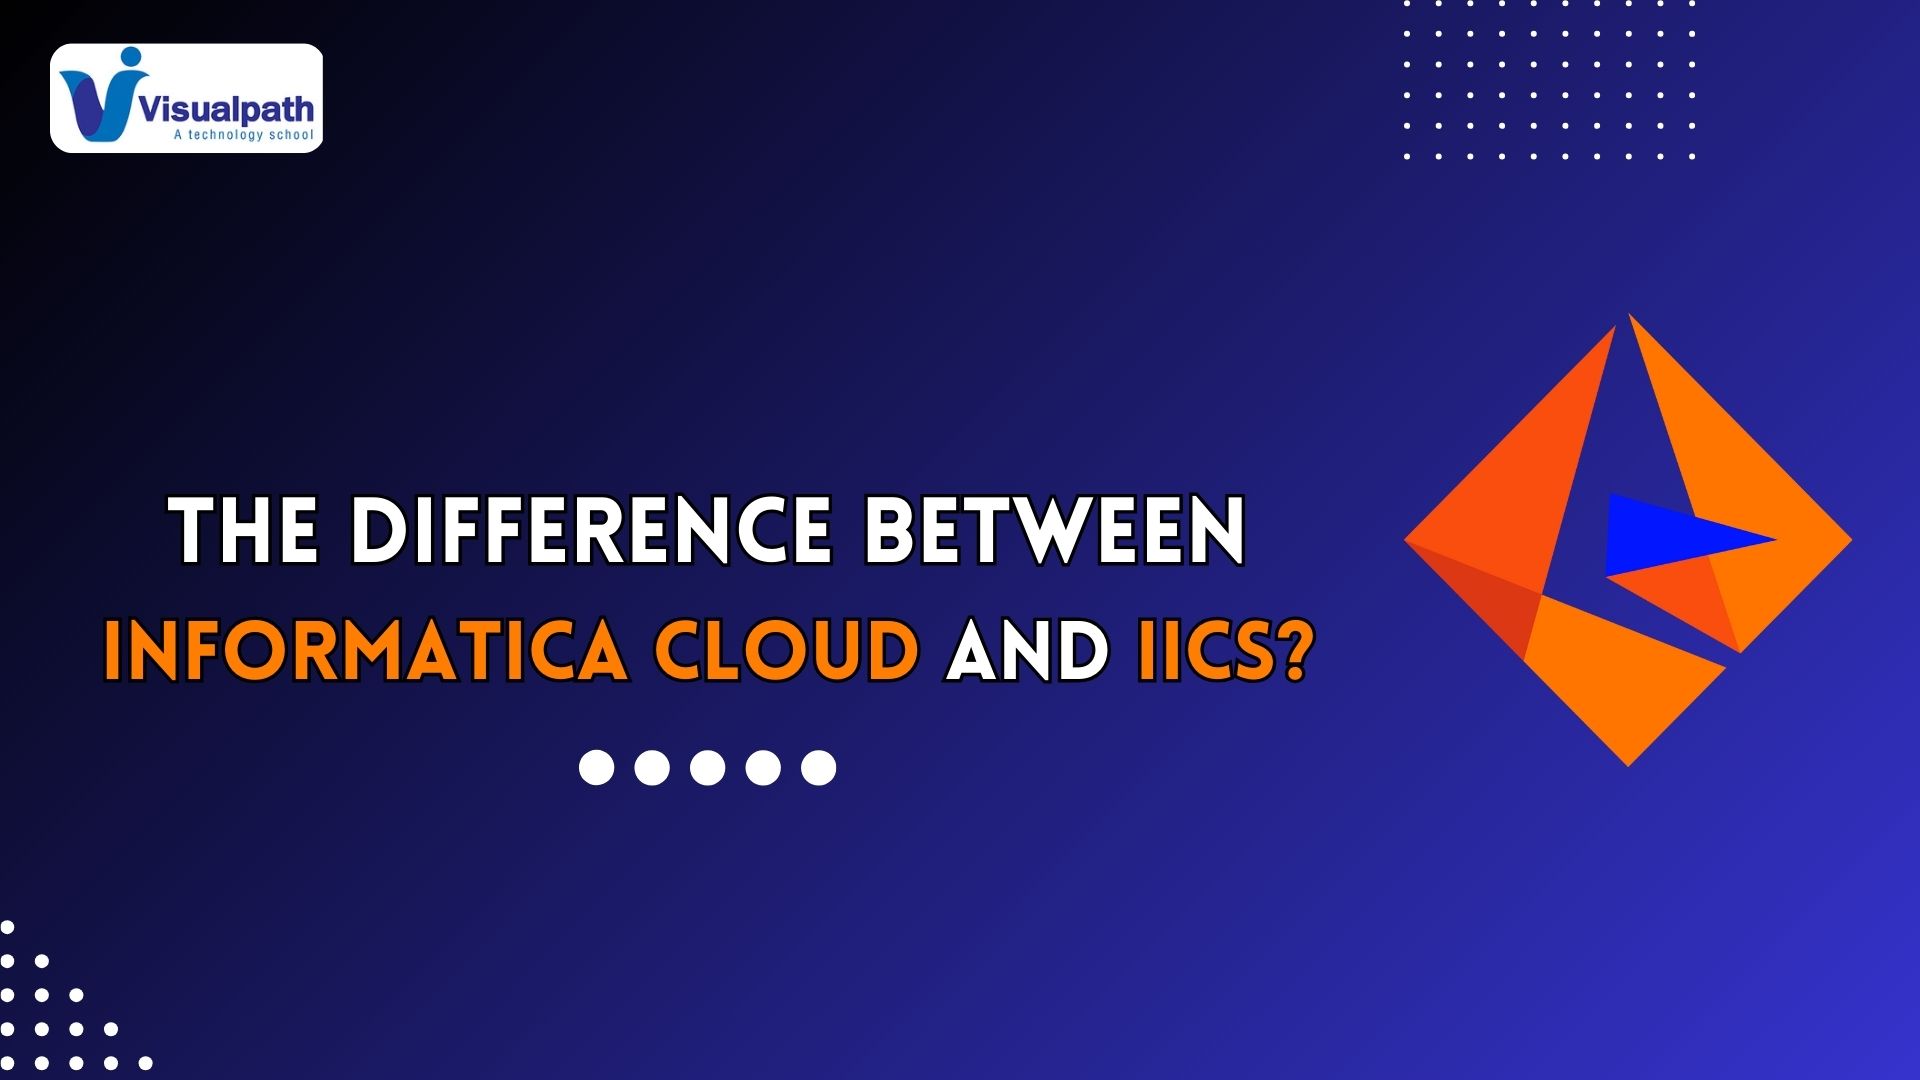 What is the difference between Informatica Cloud and IICS?